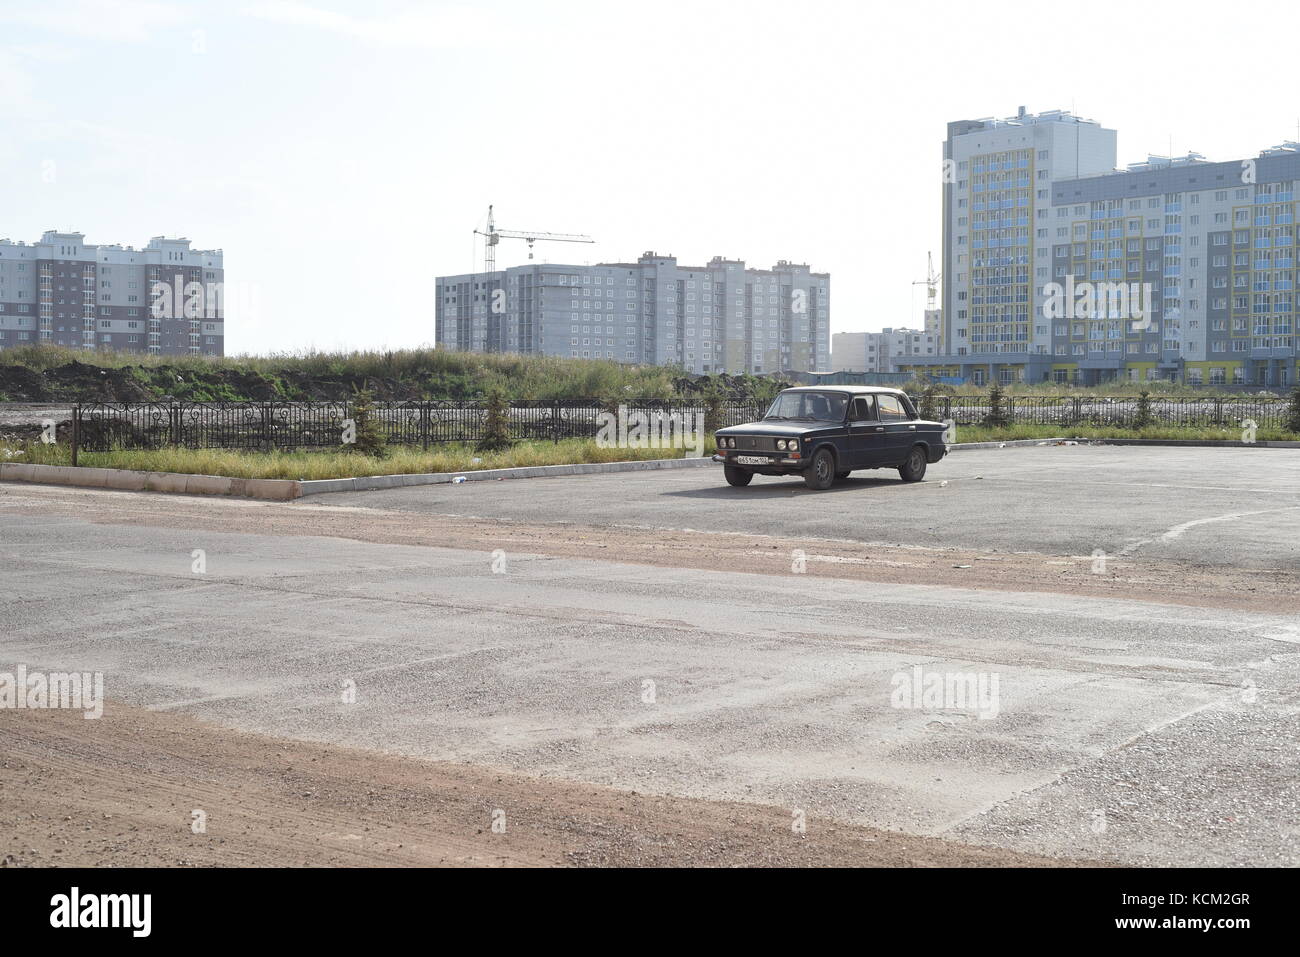 Single old Russian Lada parked in an empty car park with houses and mass apartment blocks in the background Stock Photo